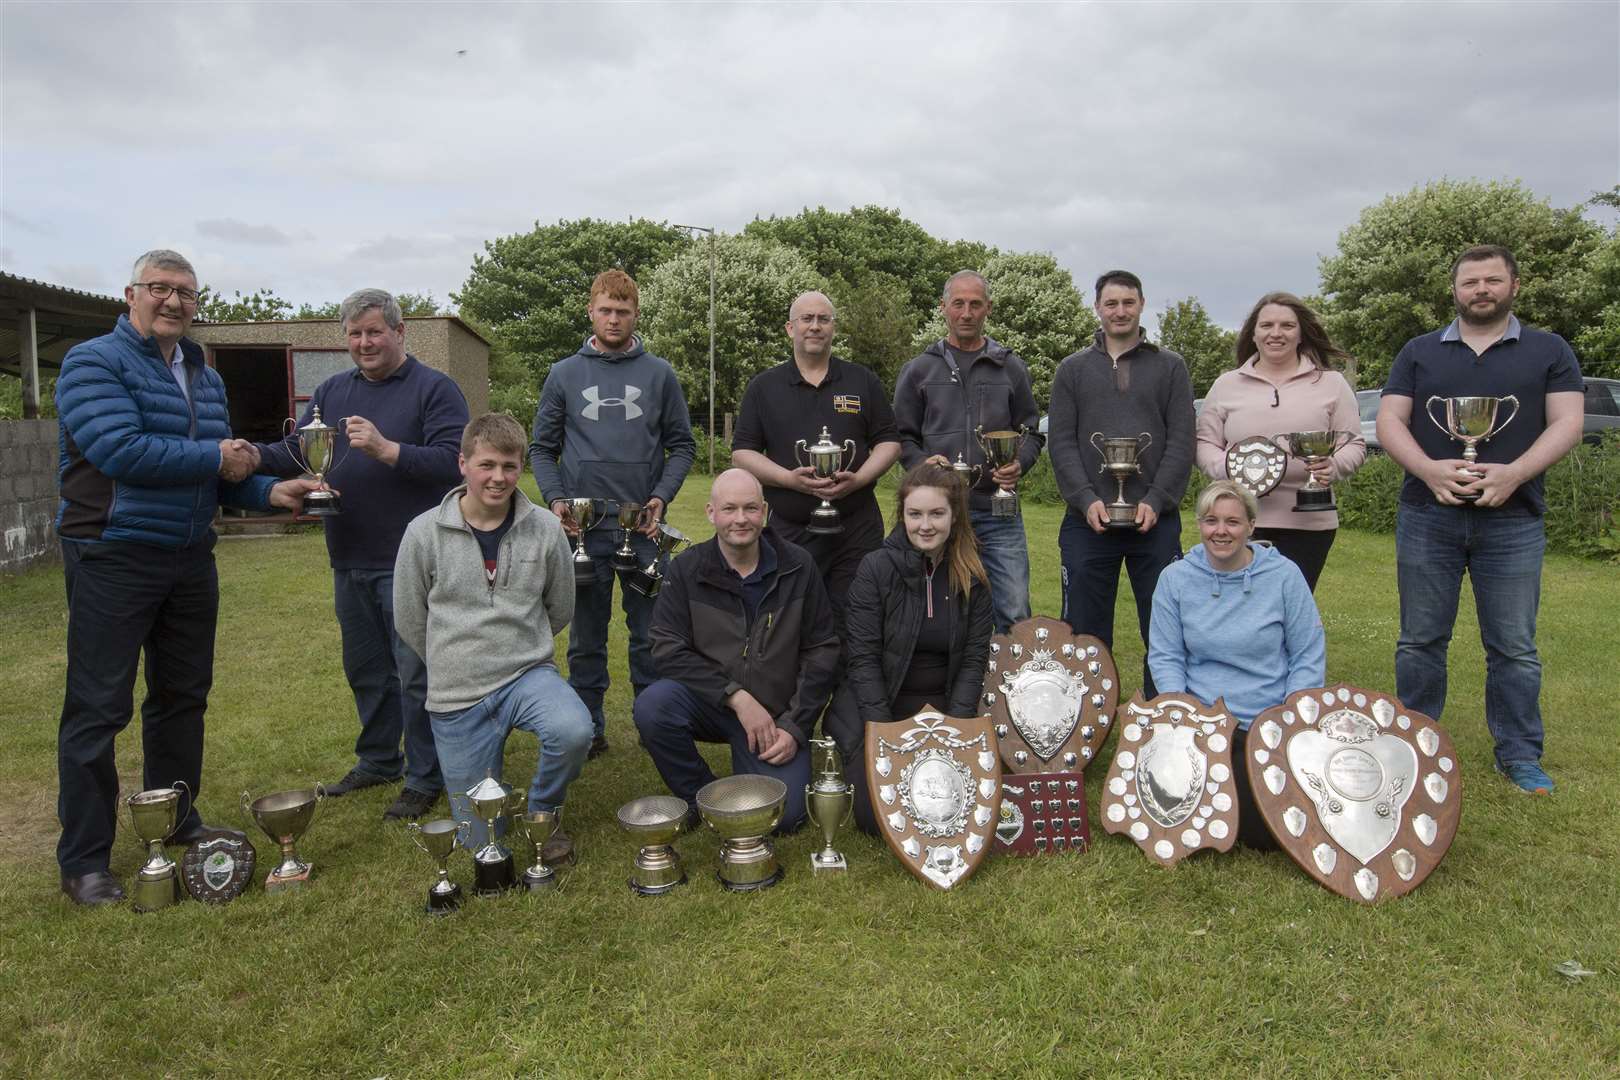 County champion Hugh Simpson, of Wick Old Stagers, receives one of his trophies from Vice-Lieutenant Willie Watt (left) at the end of Caithness Small Bore Rifle Association's annual open shoot. Looking on are some of the other trophy-winners who took part in the event in the outdoor range at Wick riverside. Picture: Robert MacDonald / Northern Studios